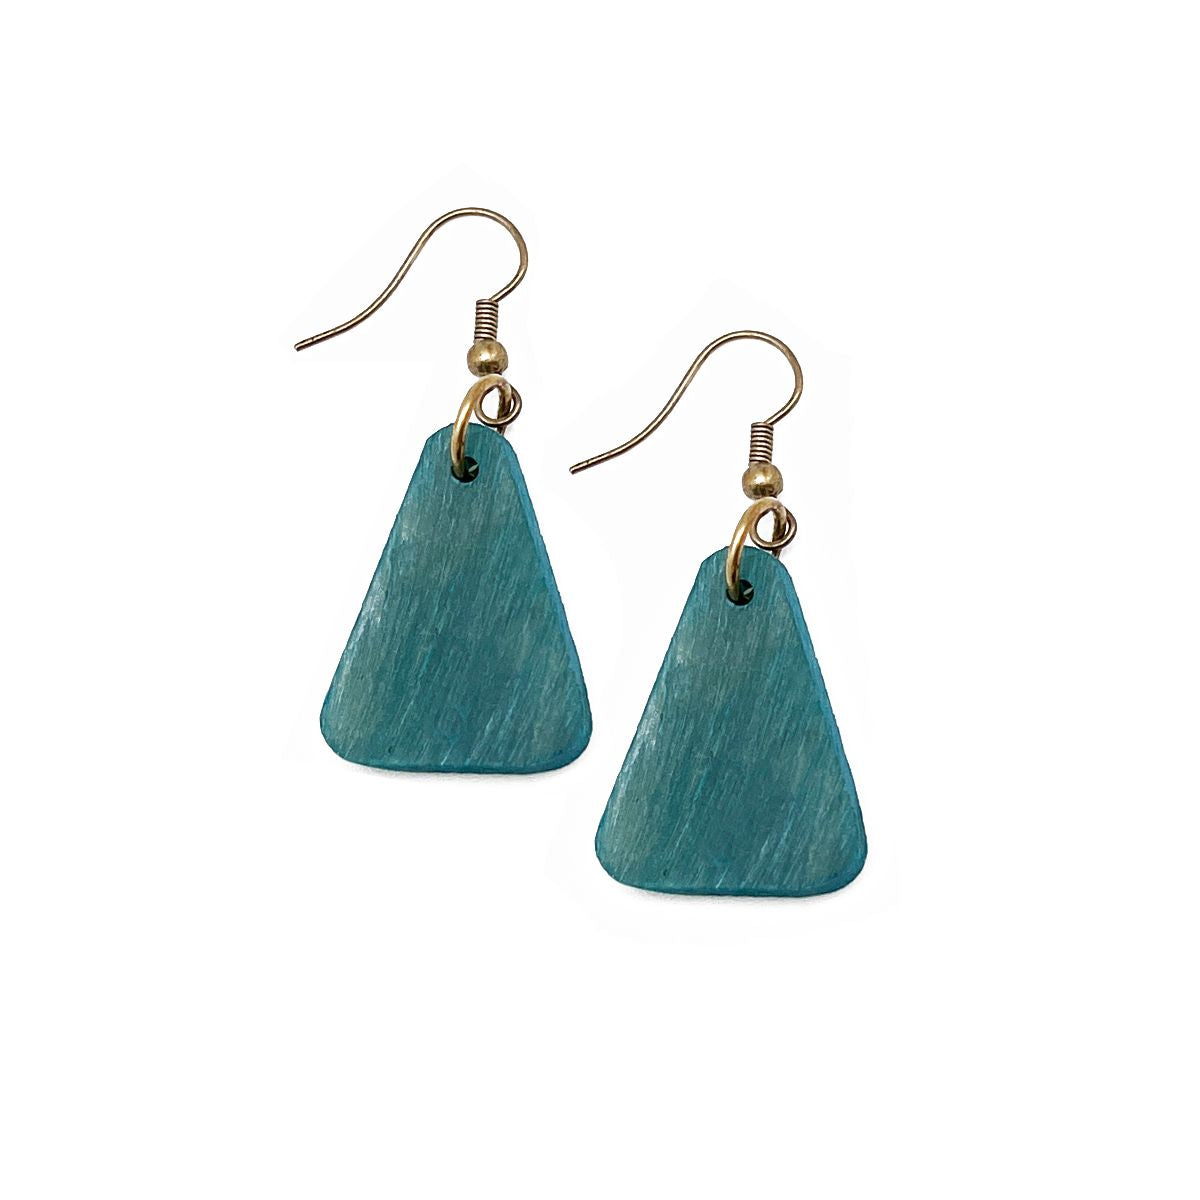 Rounded Triangle Earrings in Teal